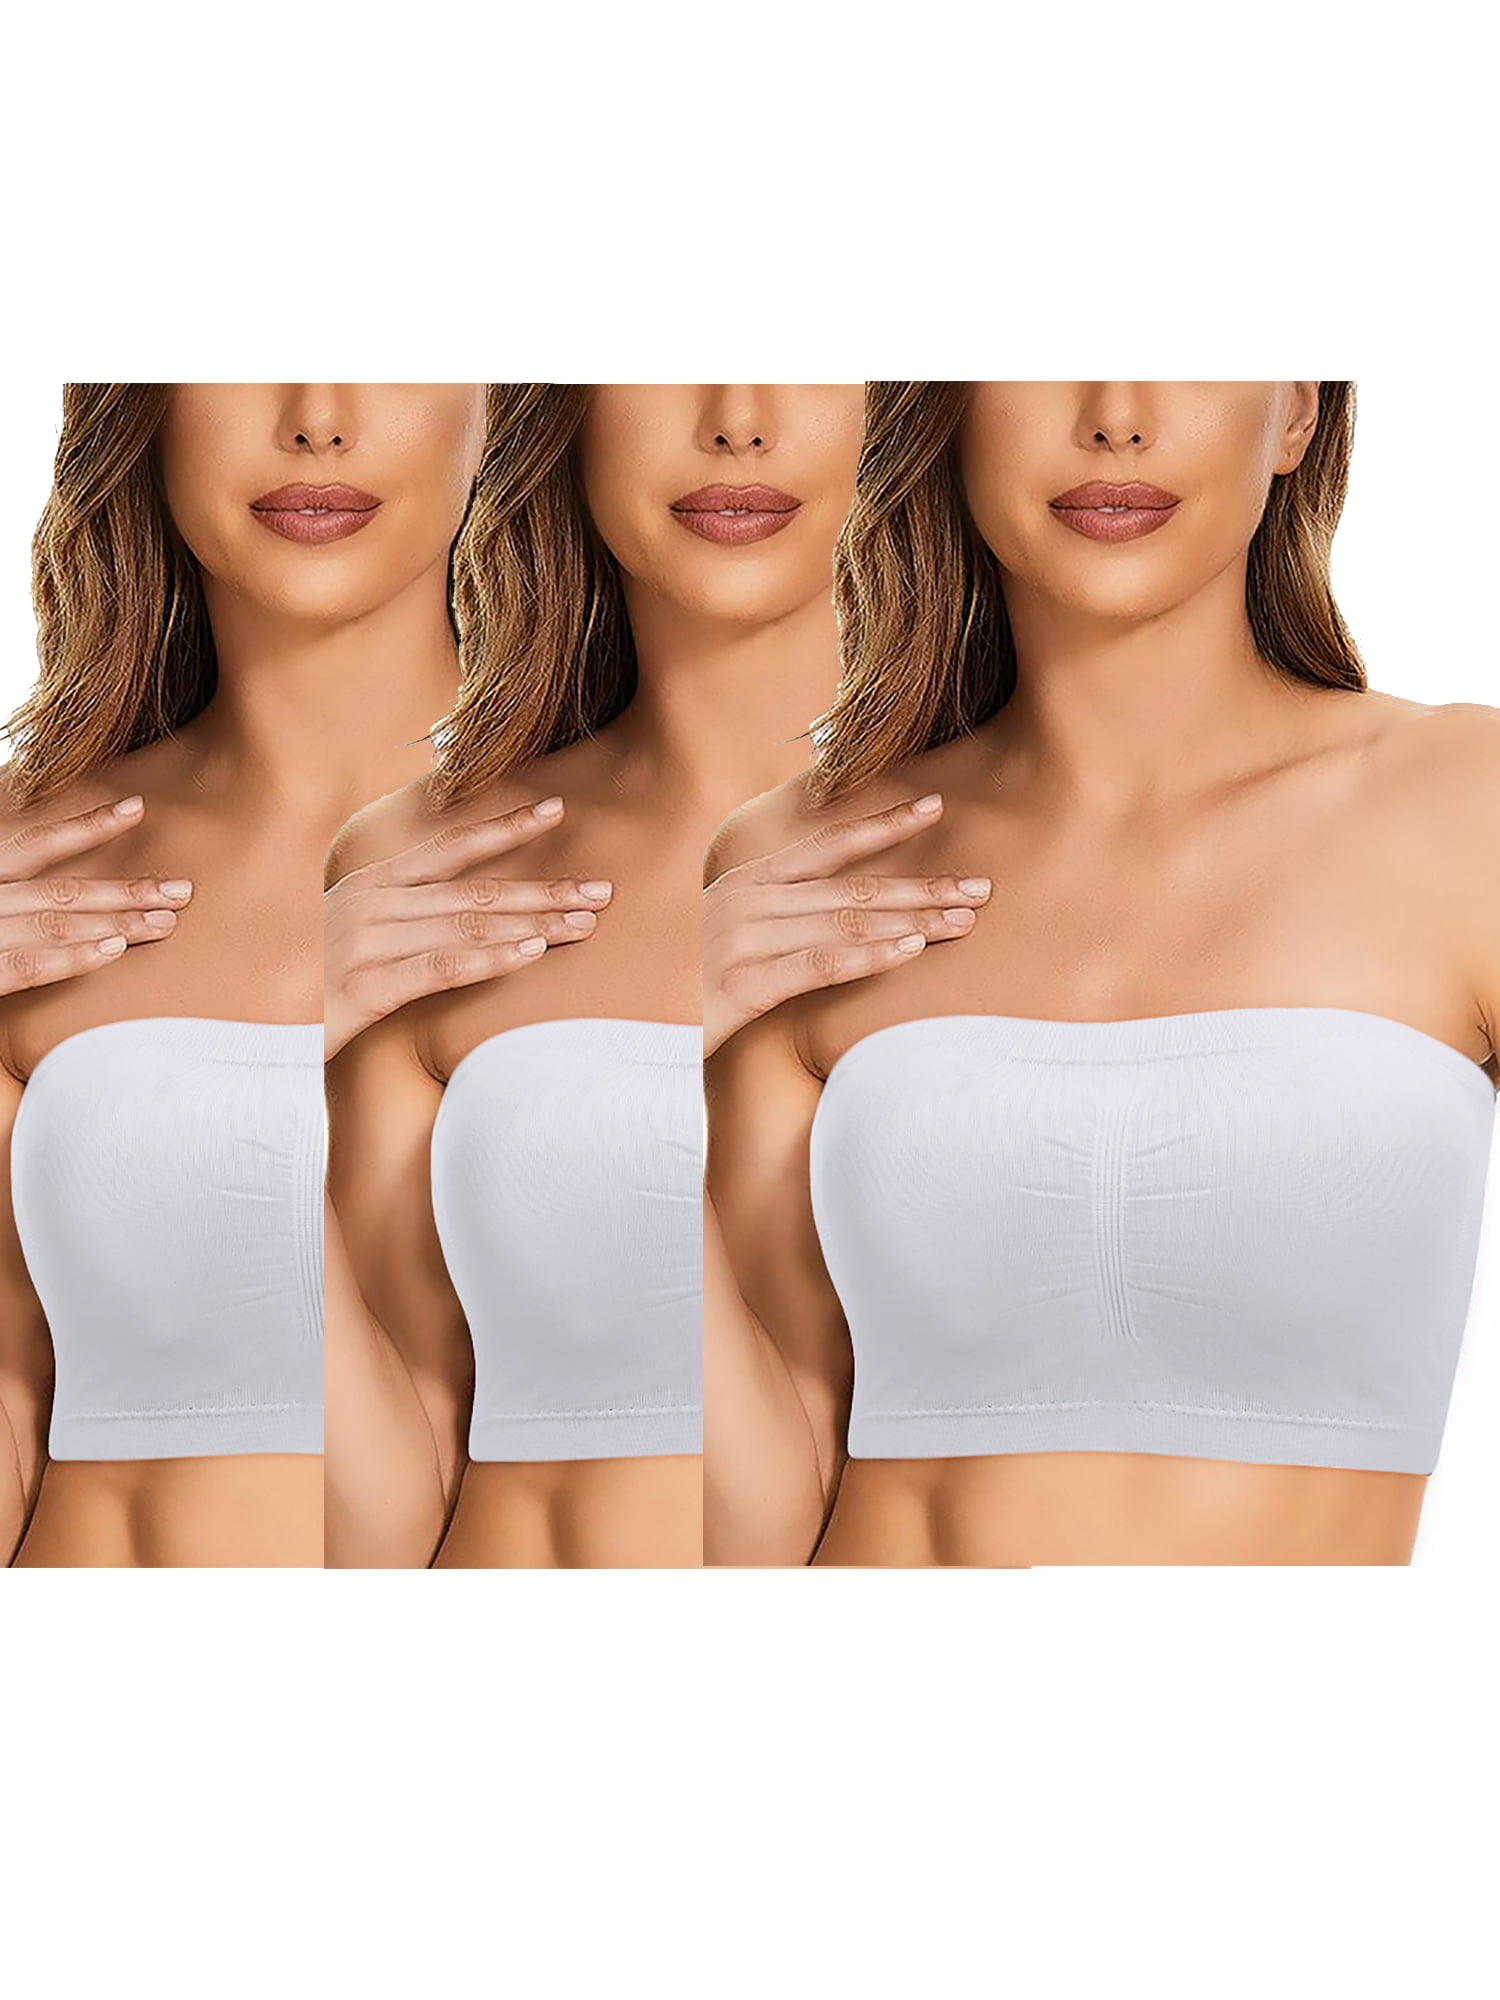 3 Pieces Women Bandeau Bra Padded Strapless Brarette Soft Bra Seamless  Bandeau Tube Top Bra, Assorted Sizes (black, White And Nude Color